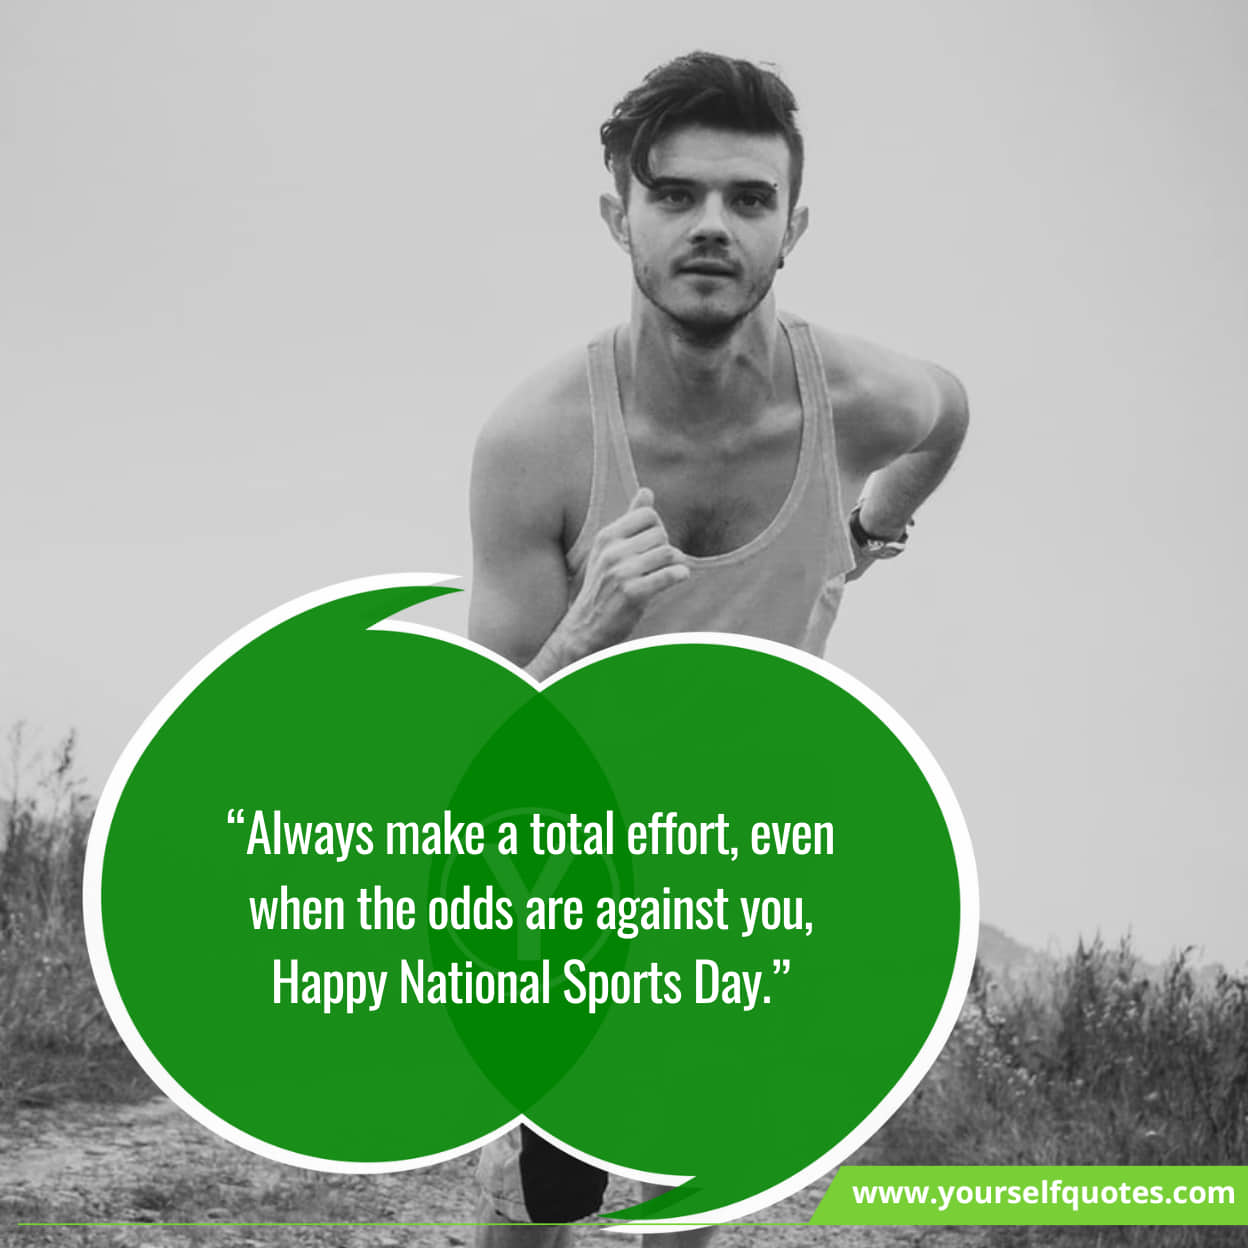 Inspirational Quotes On Happy National Sports Day